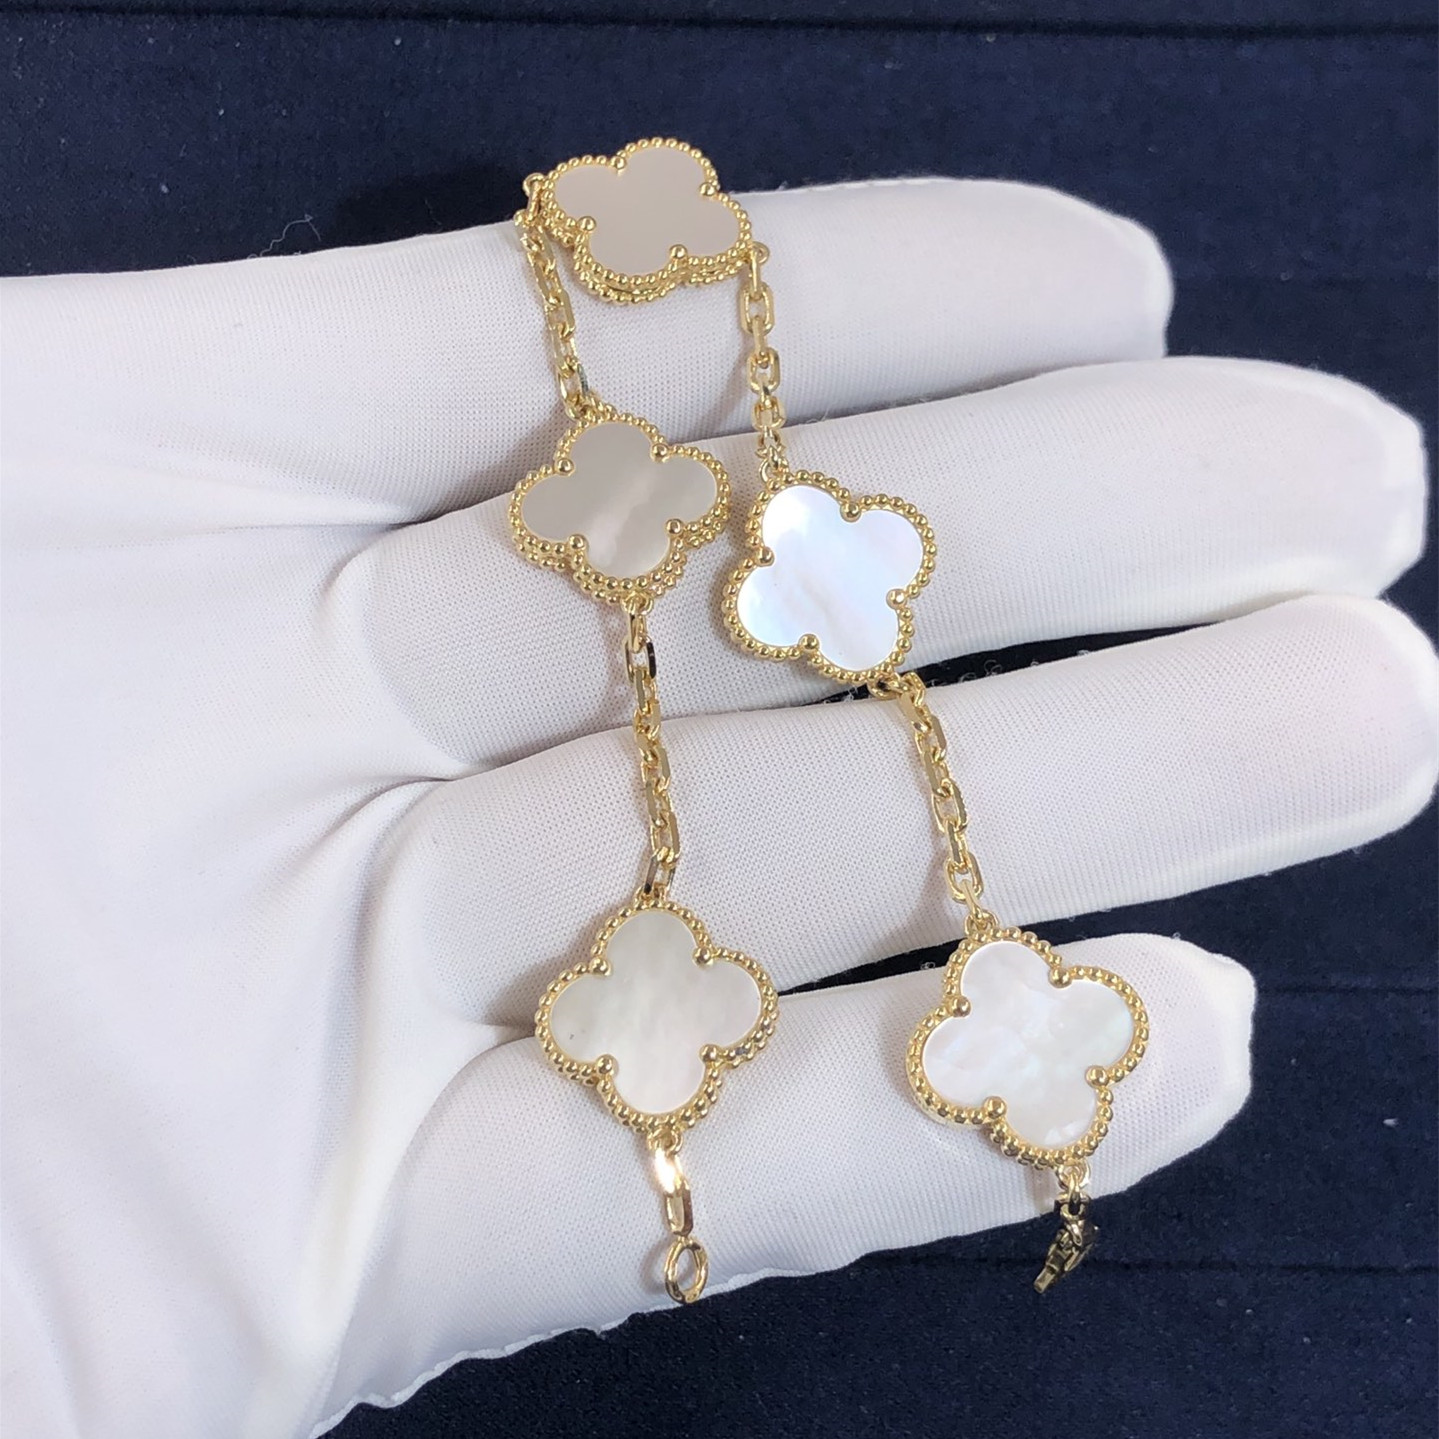 VCA Vintage Alhambra Bracelet with 5 Motifs Customize in 18K Yellow Gold and Mother-of-pearls